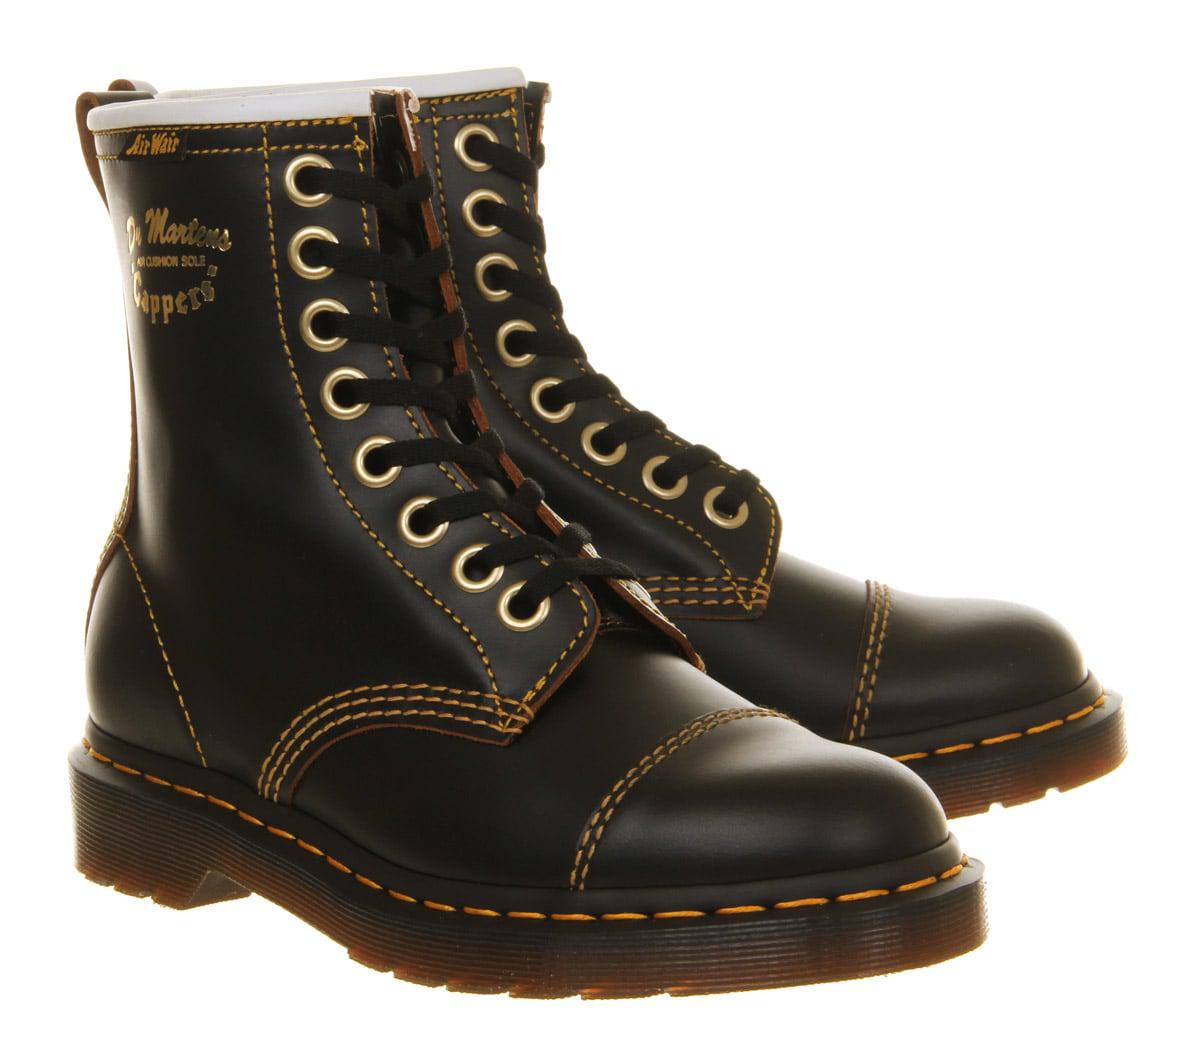 Dr. Martens Capper Boots in Black - Lyst